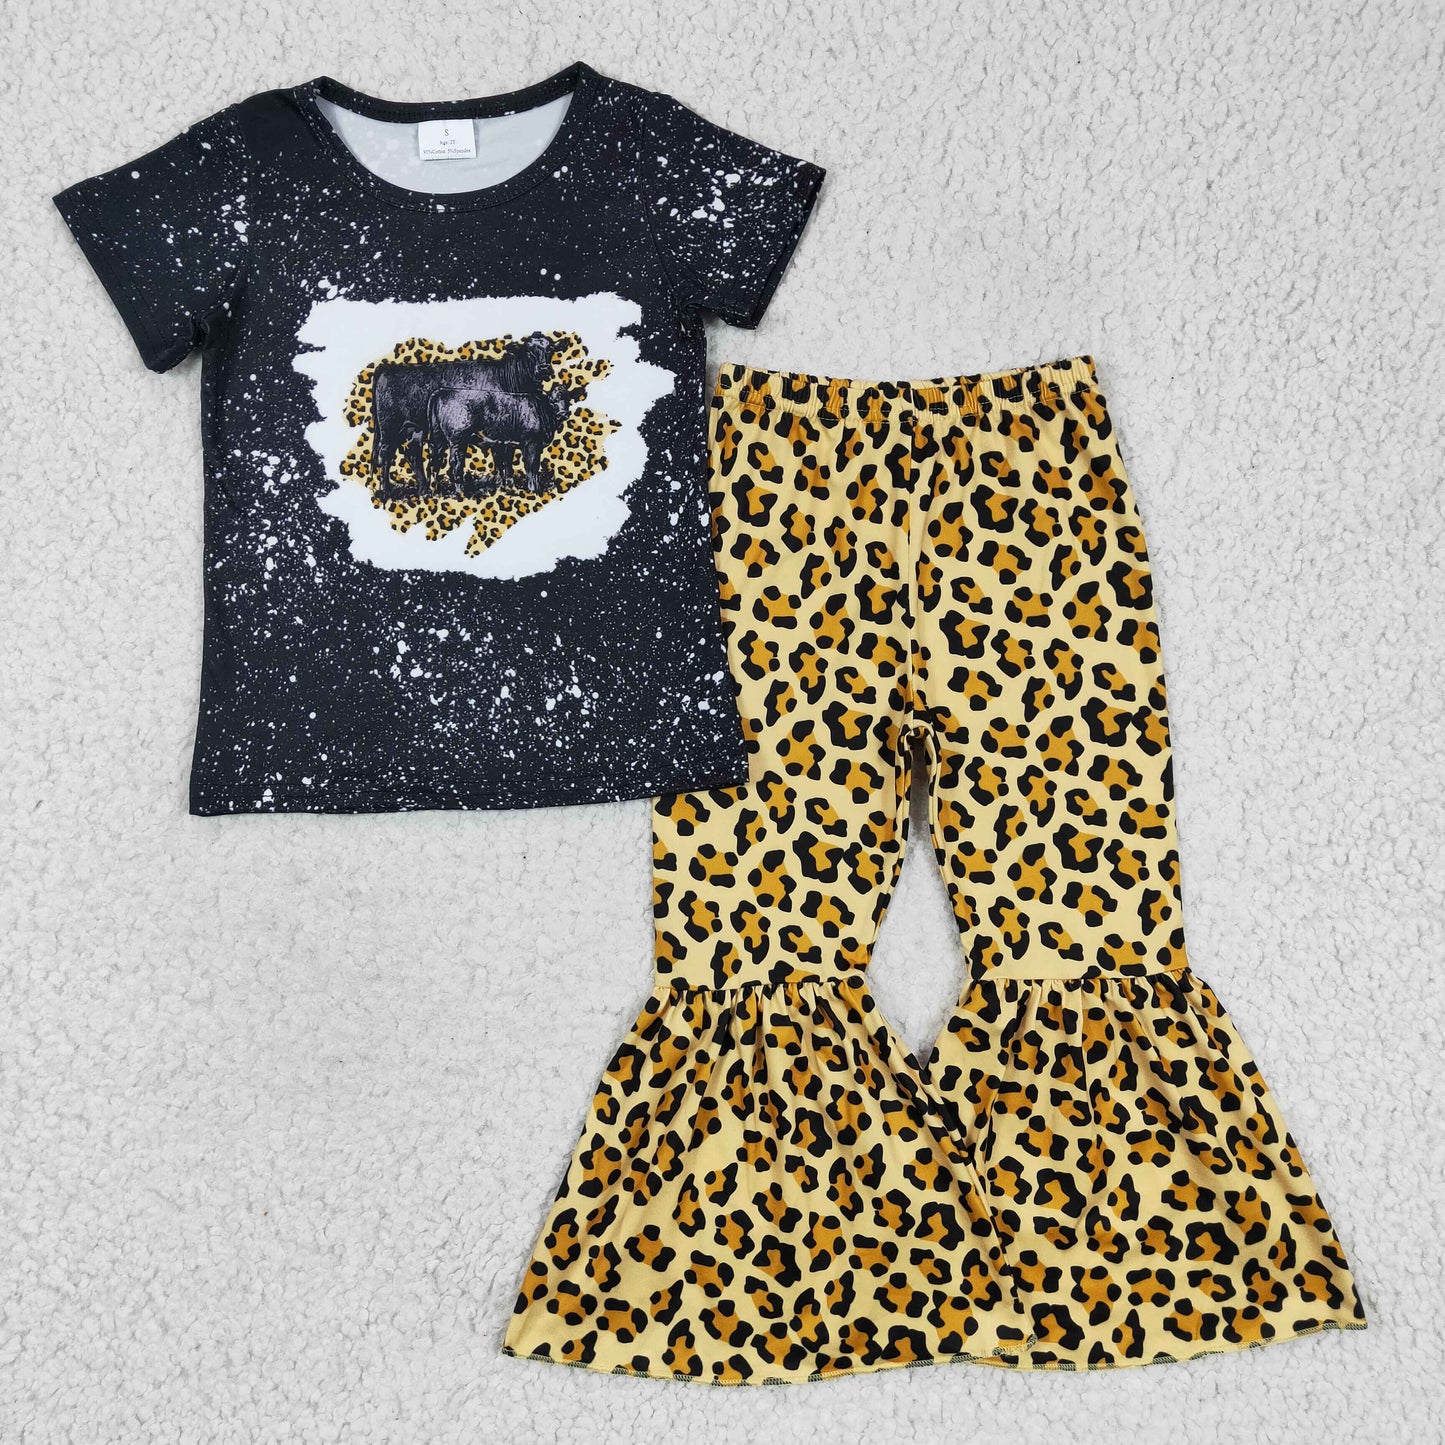 GSPO0352 Girls cow leopard print outfits